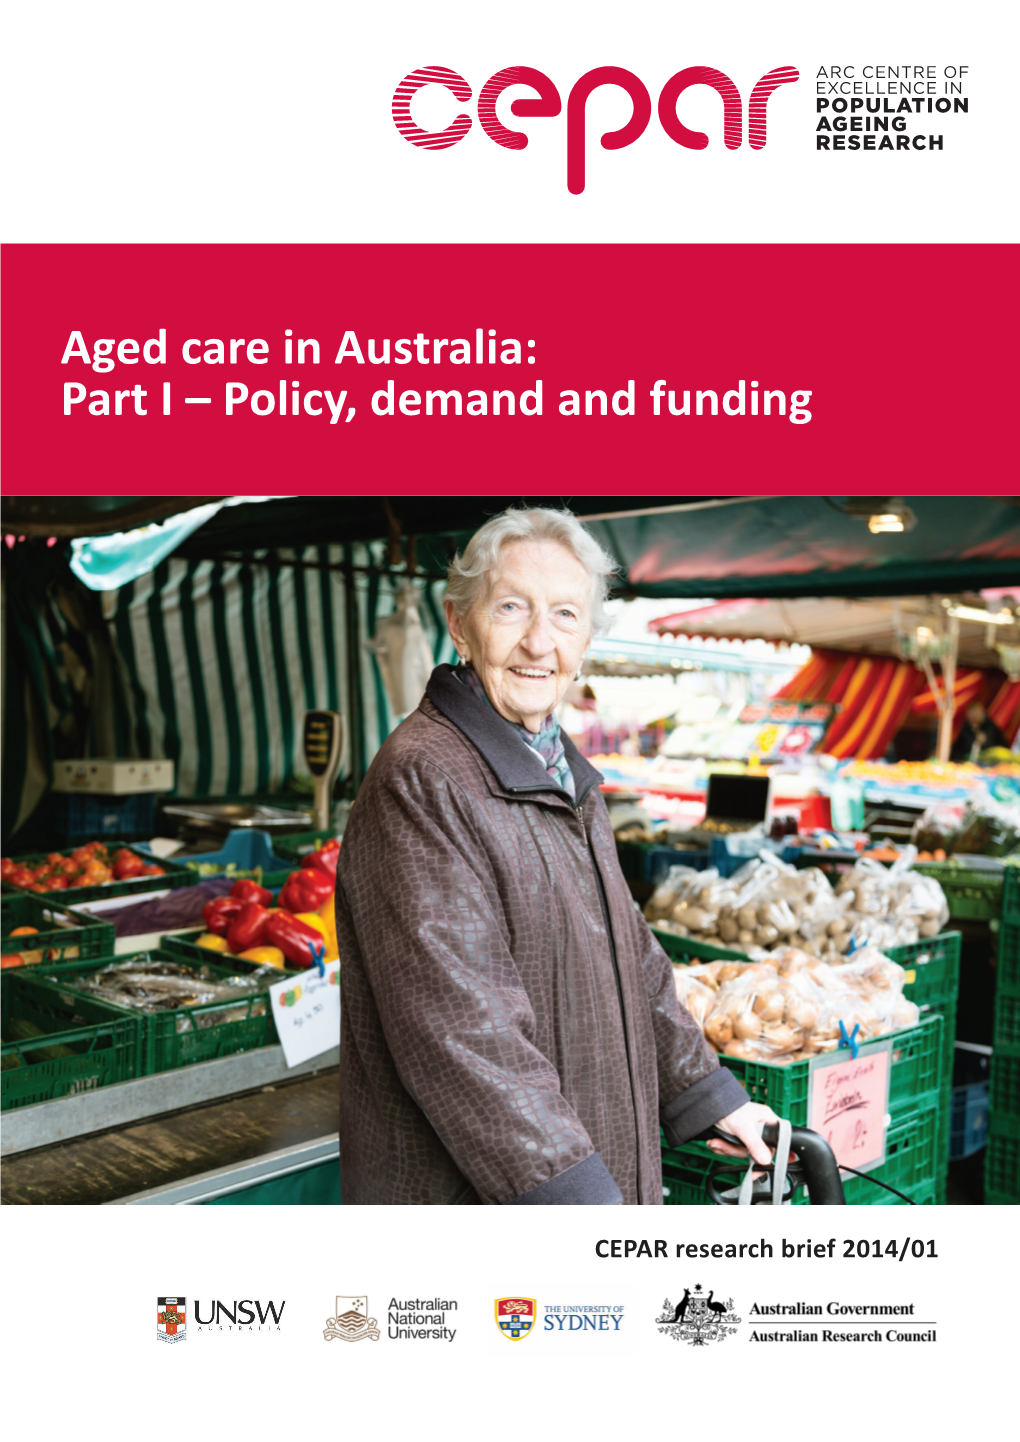 Aged Care in Australia: Part I – Policy, Demand and Funding